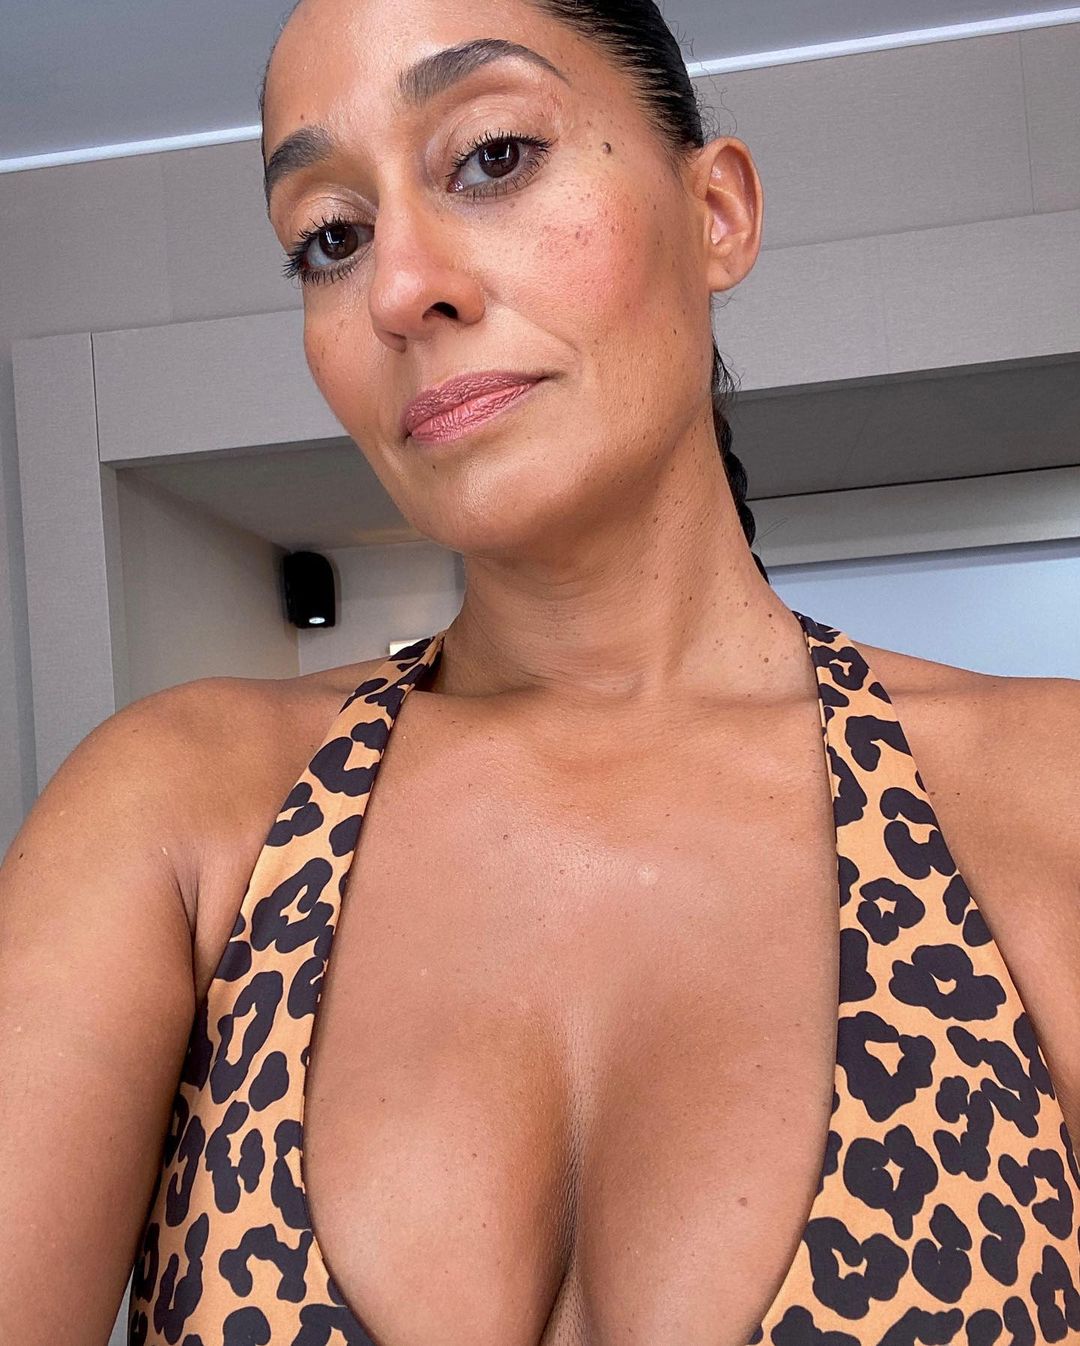 Photos n°1 : Tracee Ellis Ross Thirst Trapping Now and Then!